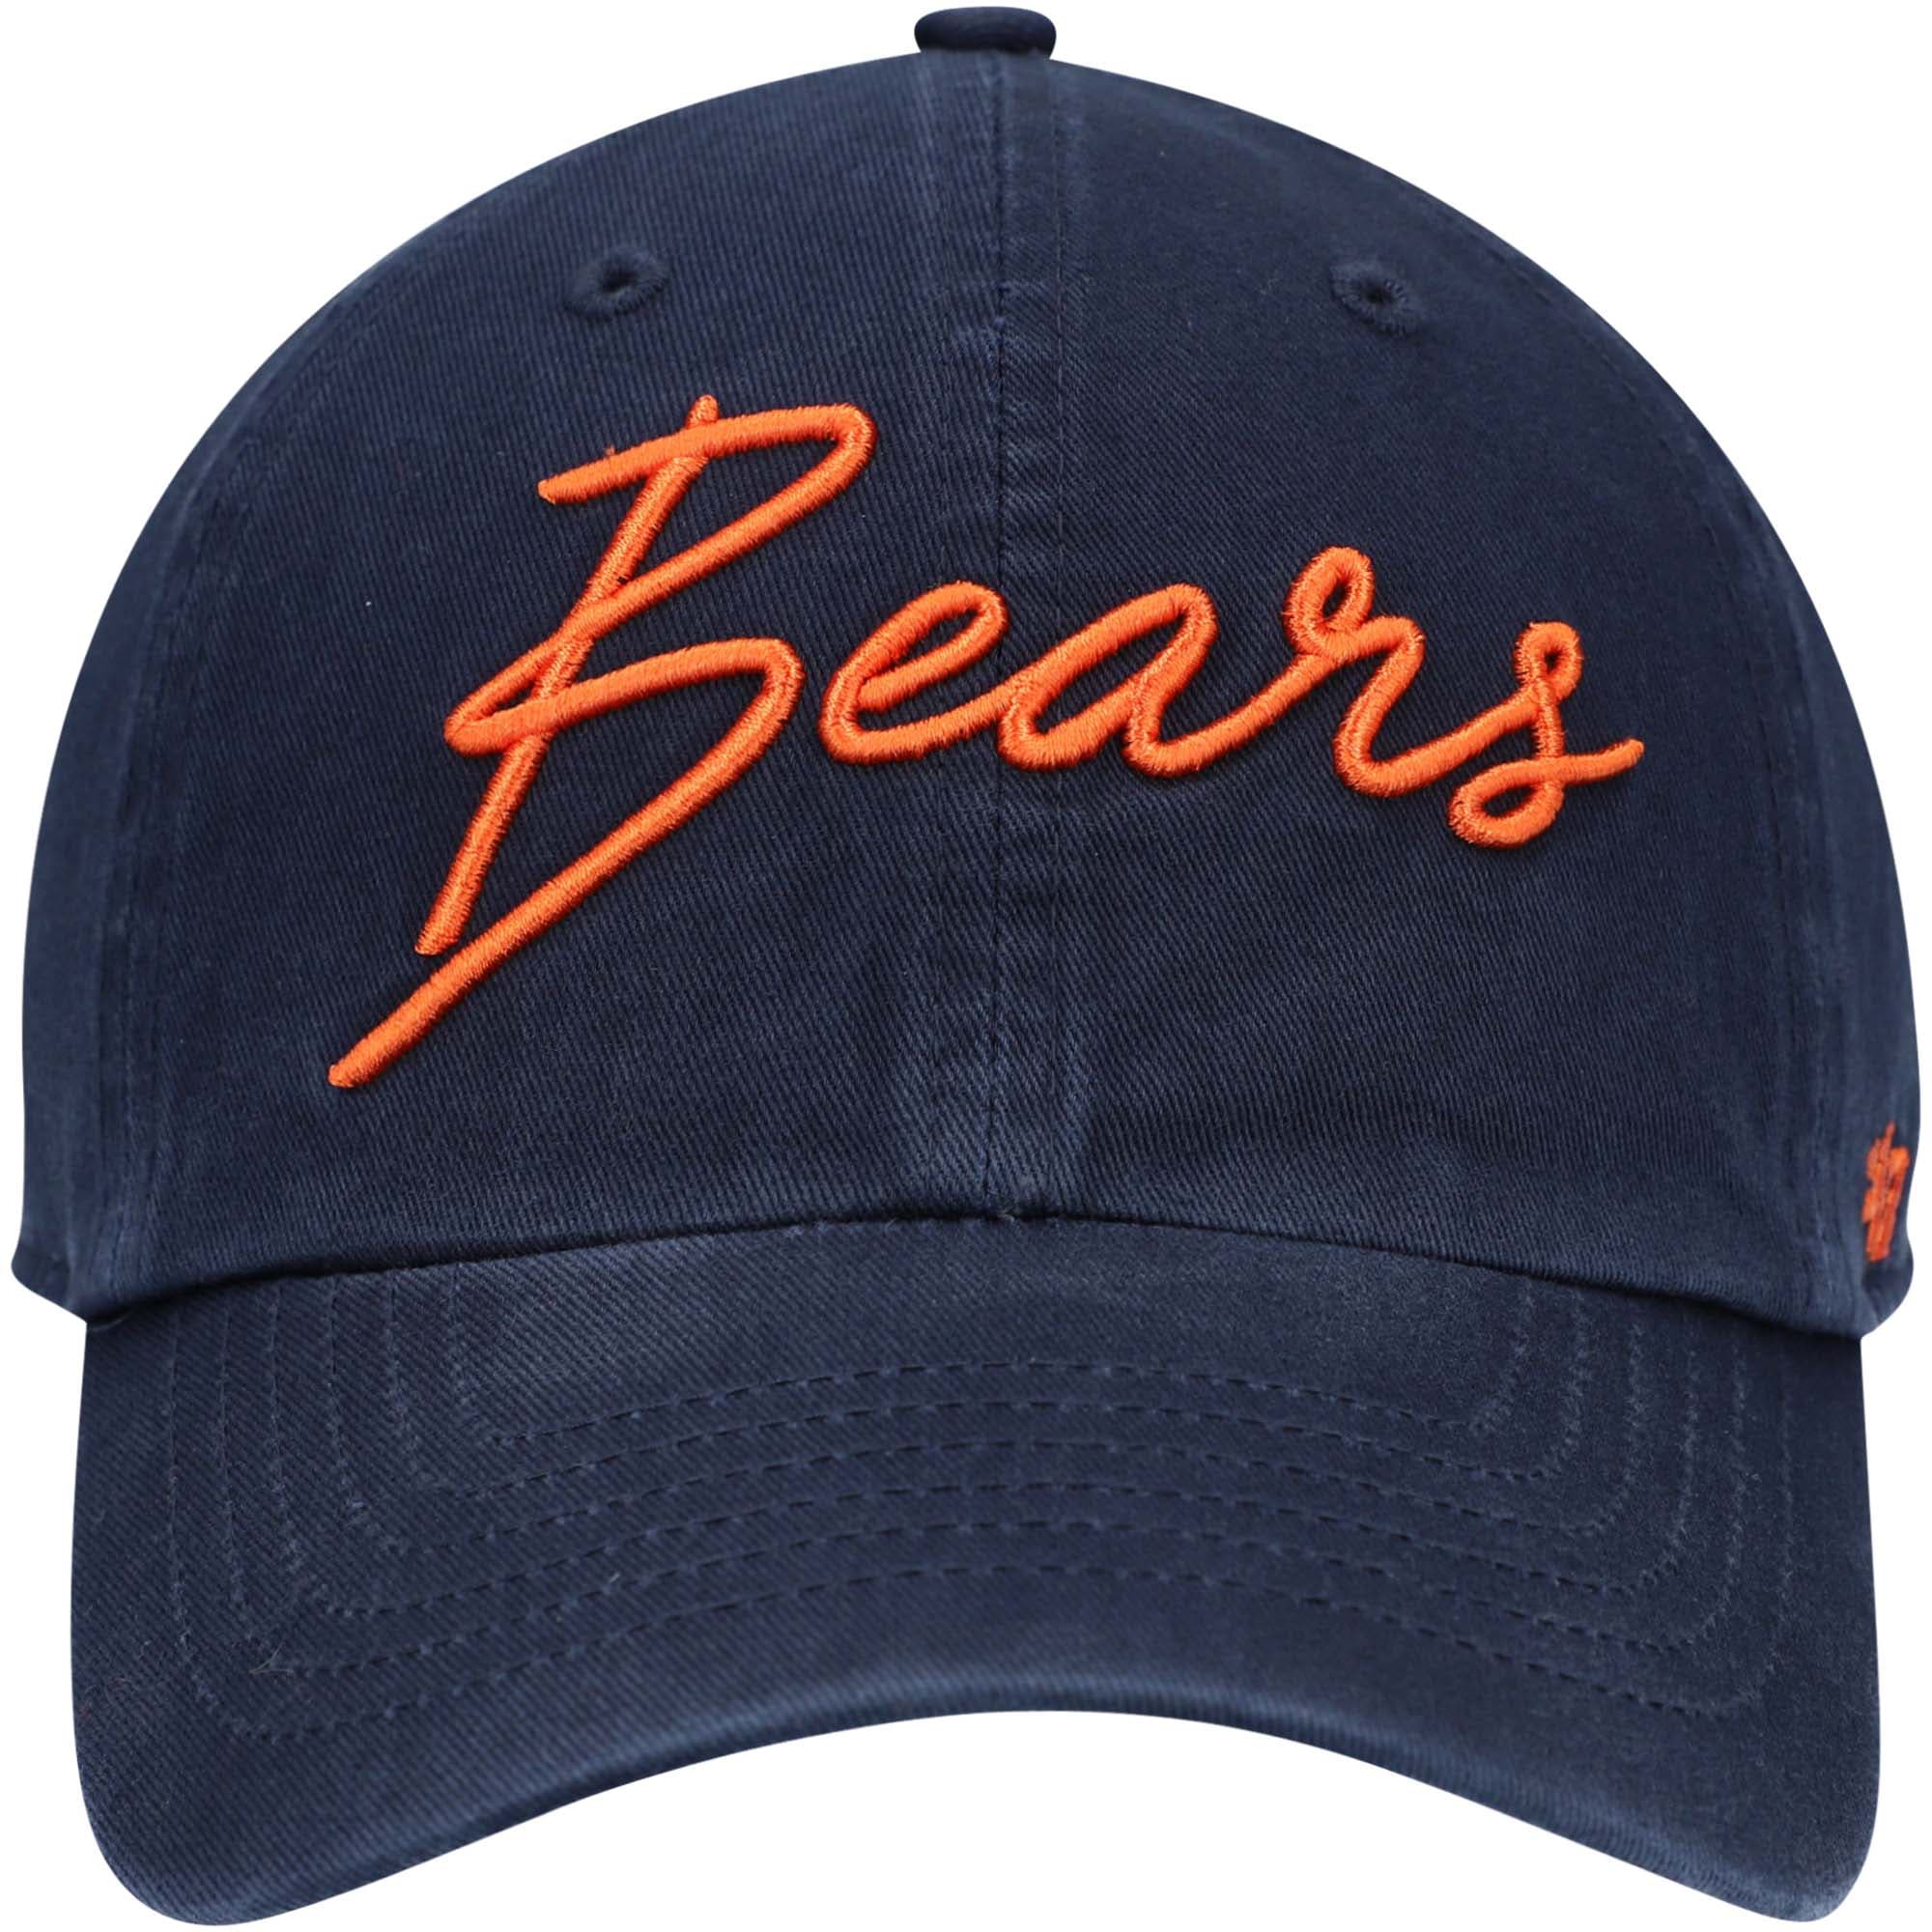 Women's '47 Navy Chicago Bears Vocal Clean Up Adjustable Hat - OSFA - image 2 of 4